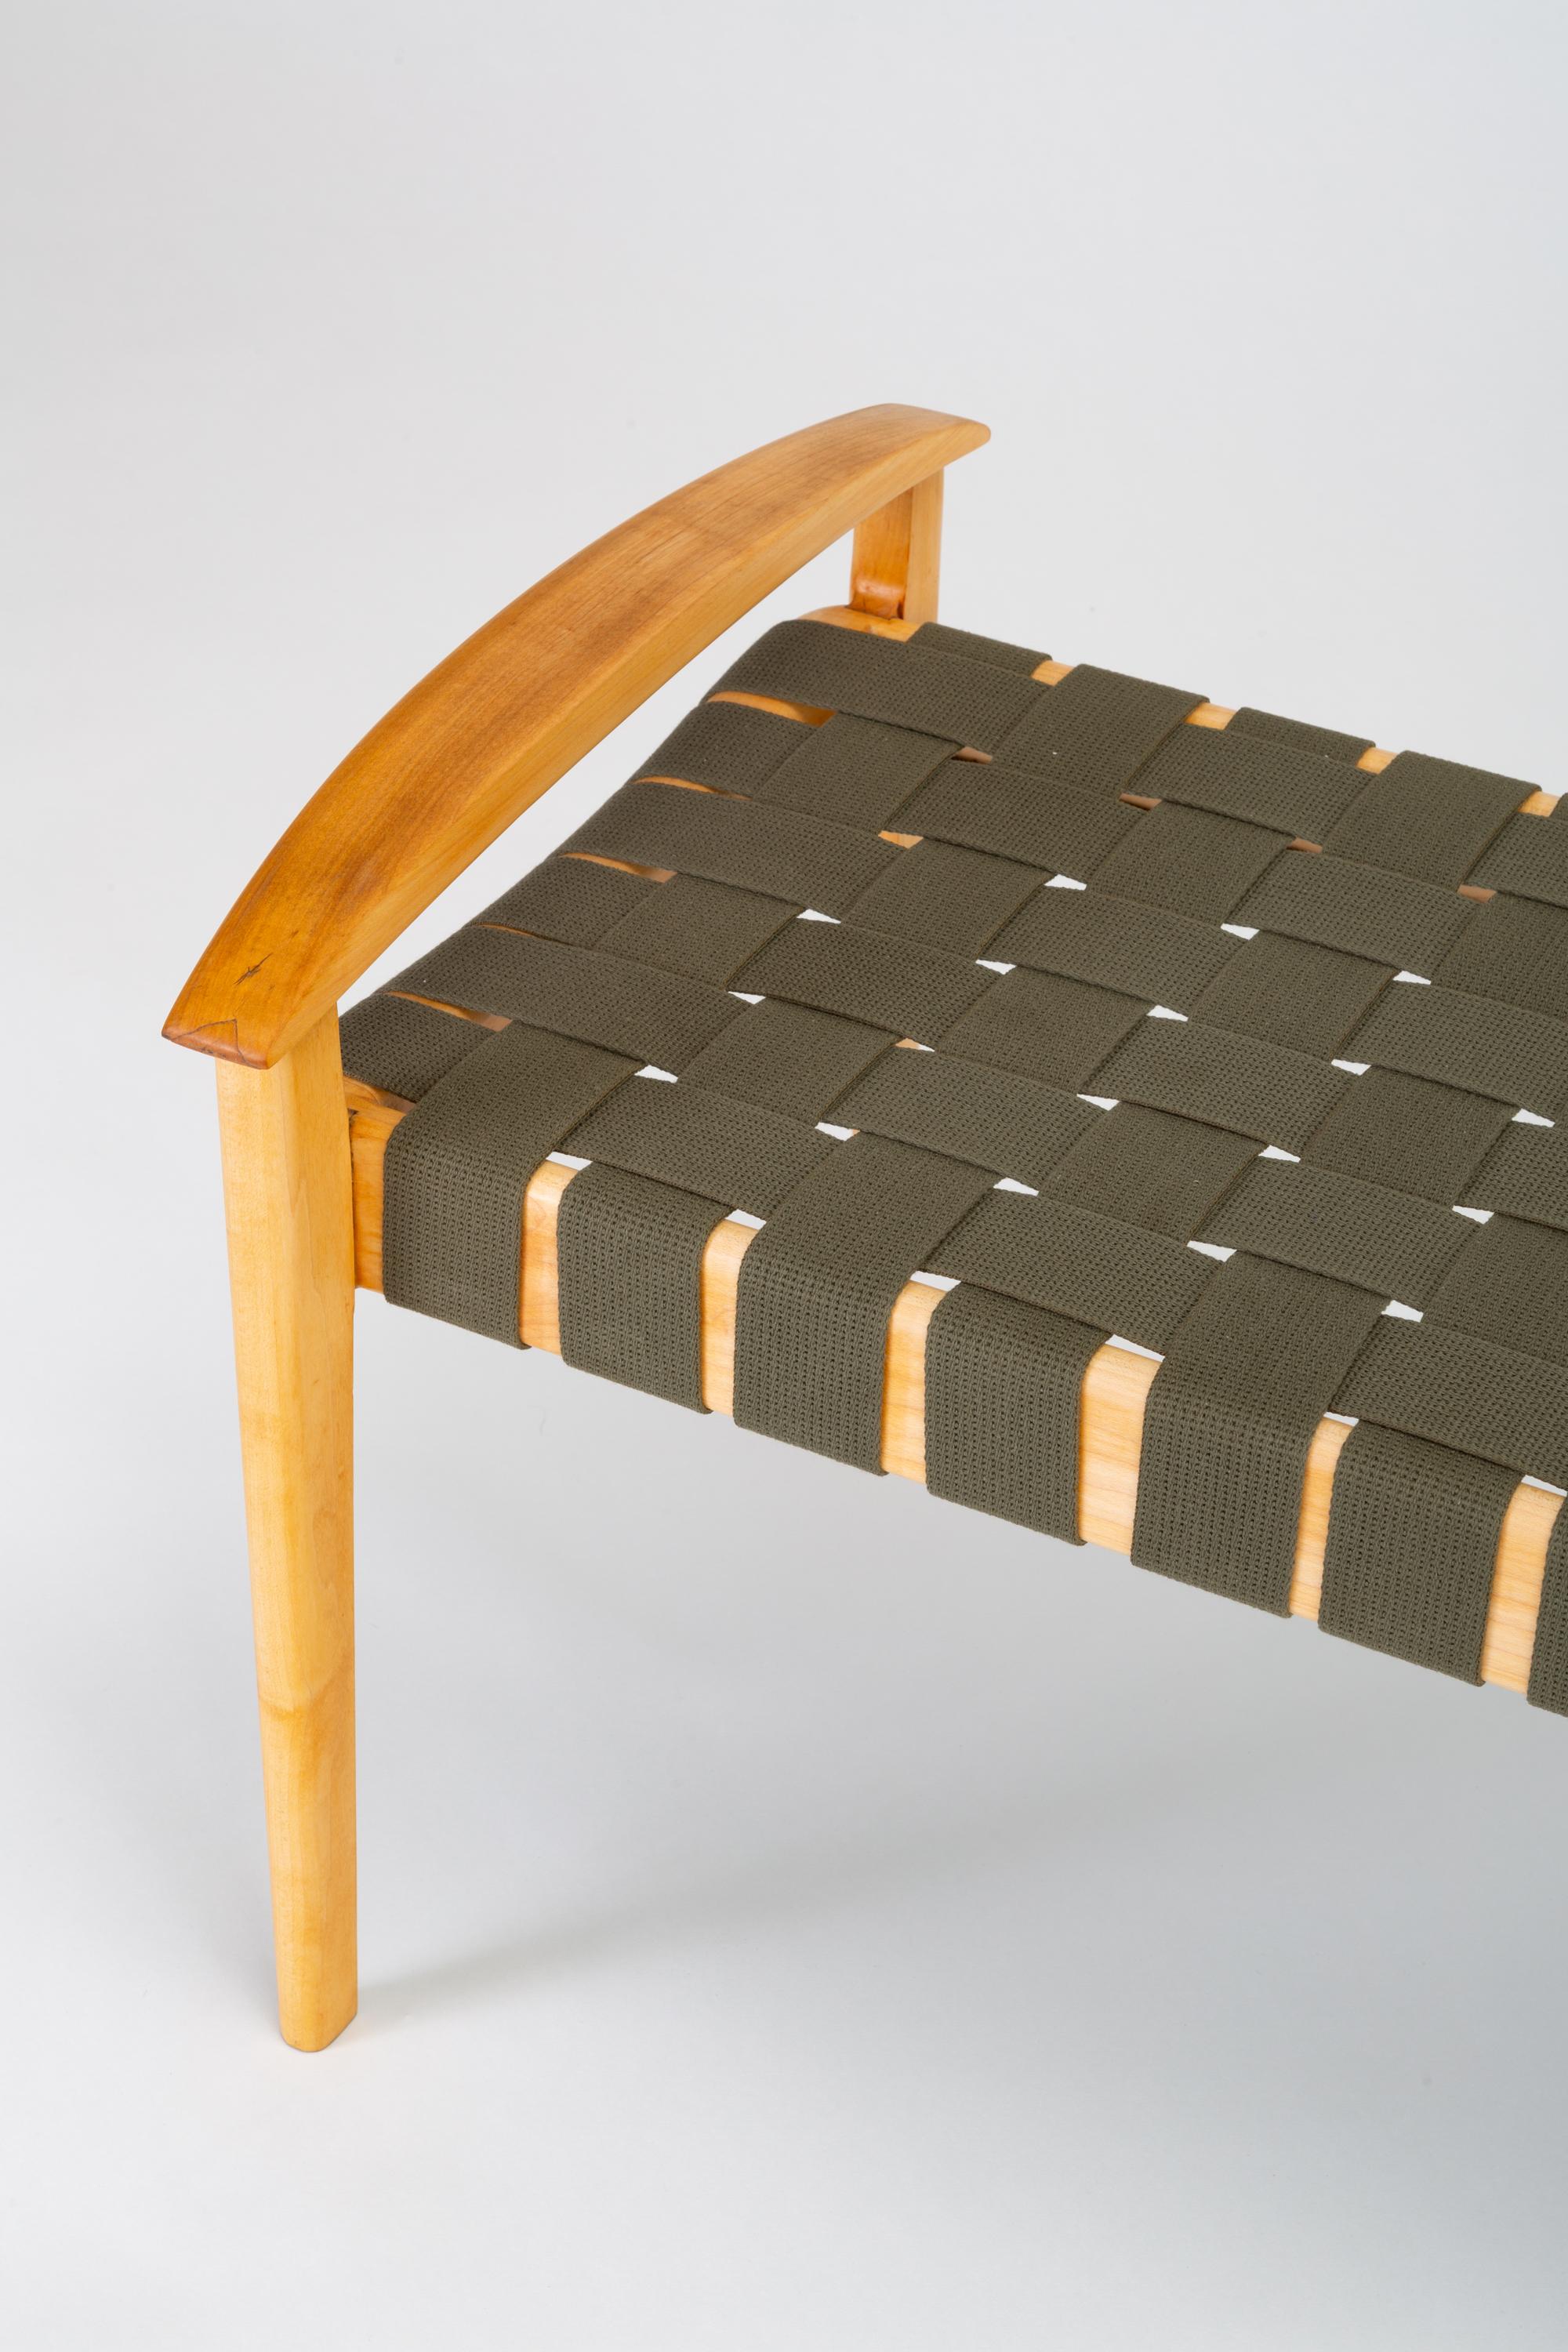 American-Made Maple Bench with Woven Seat by Tom Ghilarducci 6